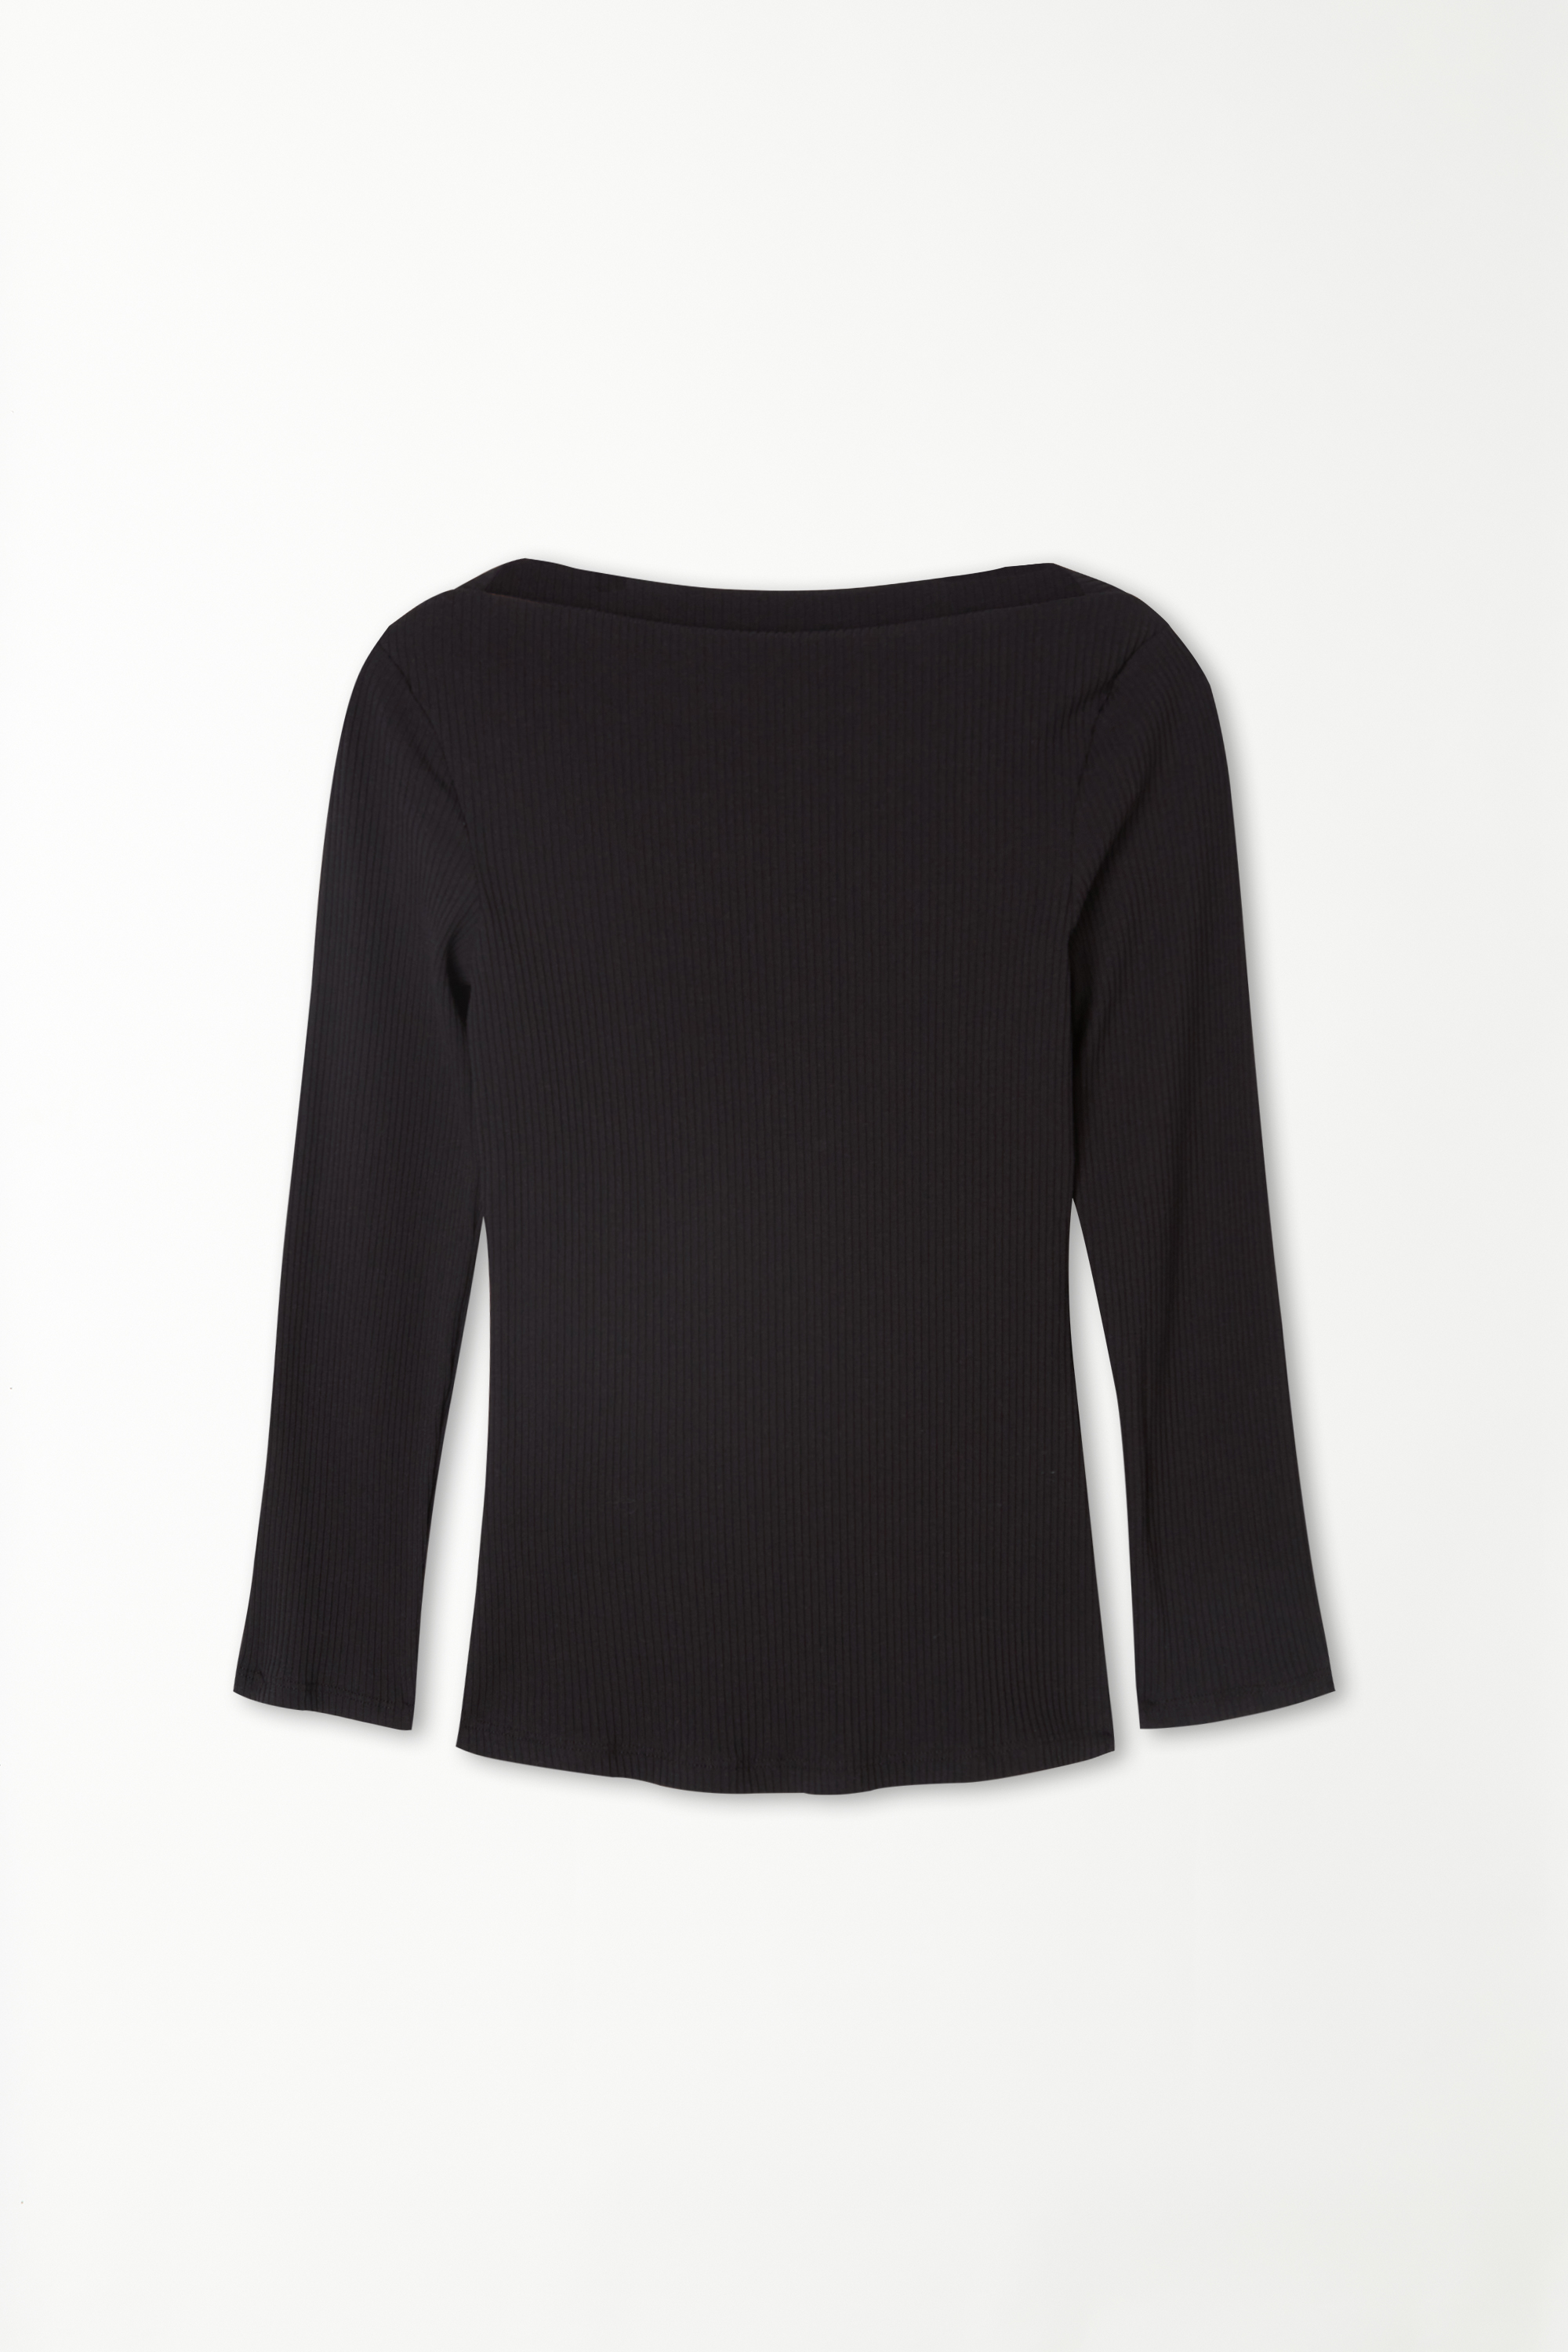 3/4 Length Sleeve Ribbed Top with Boat Neck